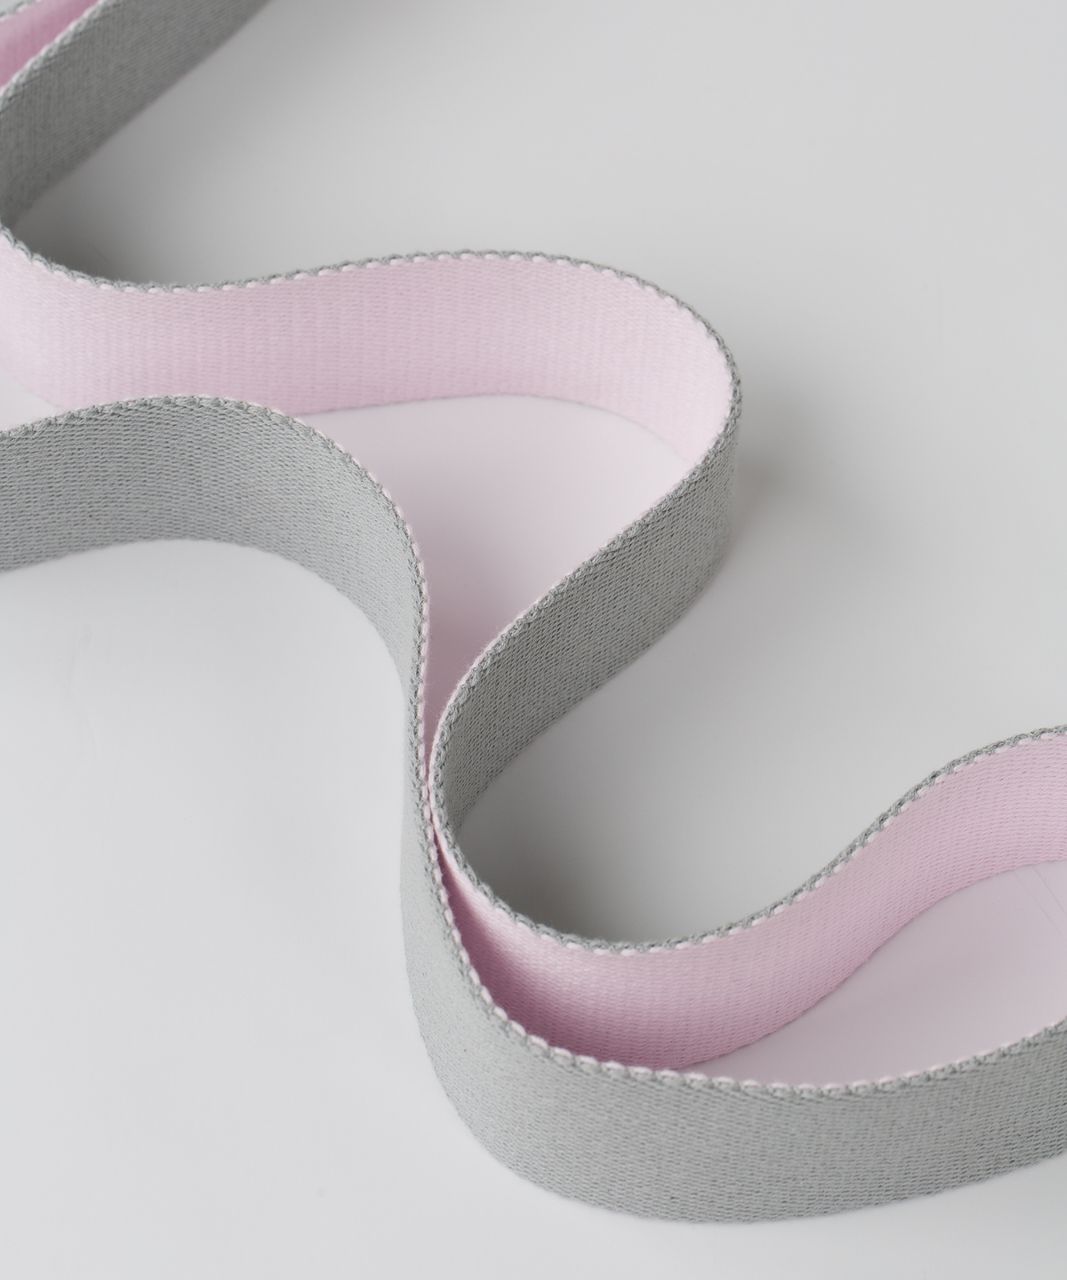 Lululemon No Limits Stretching Strap - Silver Spoon / Powdered Rose